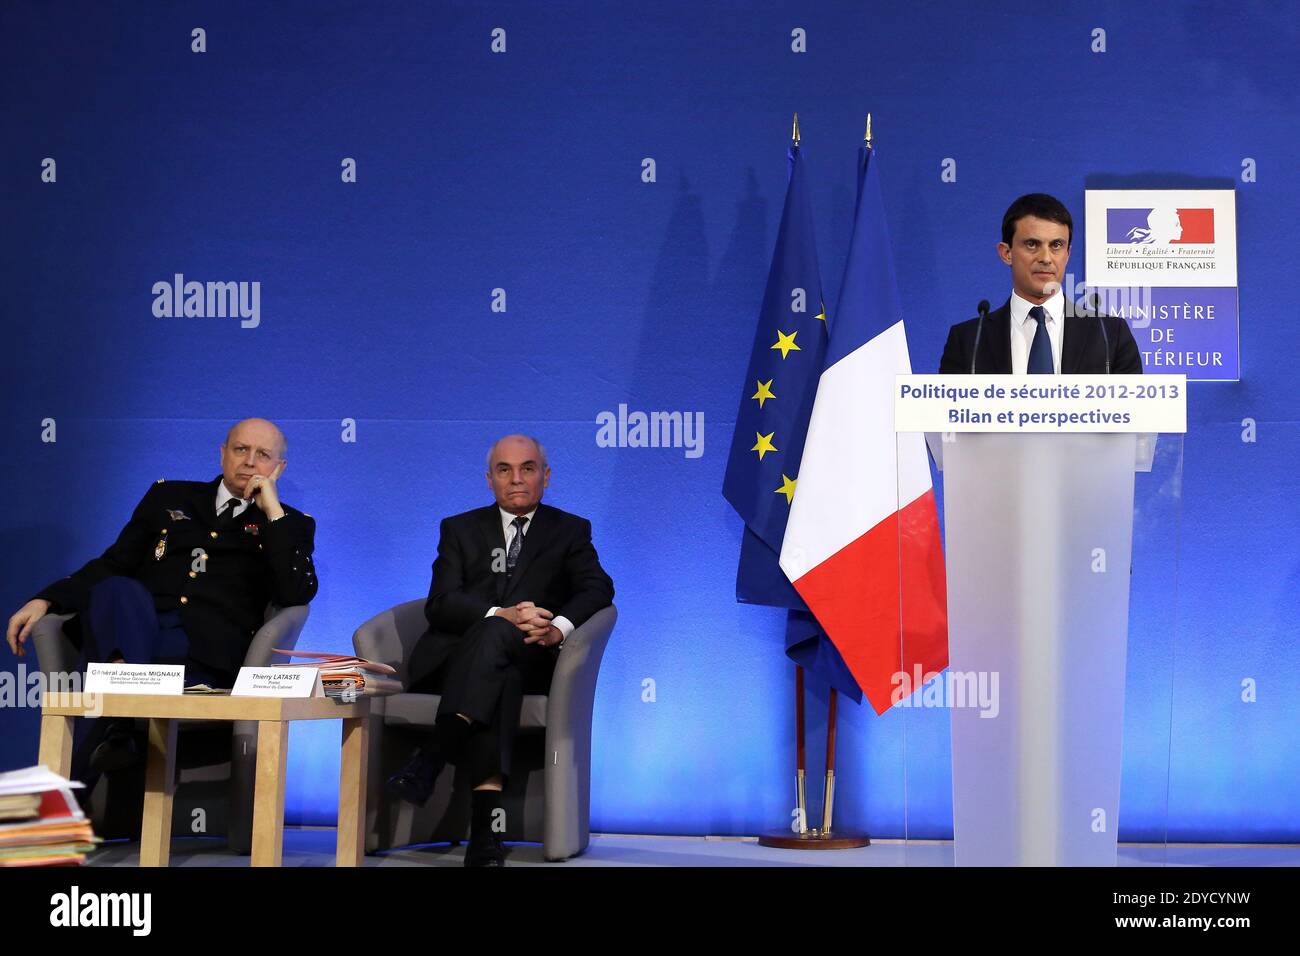 French Interior minister Manuel Valls flanked by Jacques Mignaux general director of the gendarmerie nationale and Thierry Lataste, chief of staff of French Interior minister delivers a speech at the ministry in Paris, to present his report of the past year and the prospects of the security policy for the upcoming year, in Paris, France on January 18, 2013 Photo by Stephane Lemouton/ABACAPRESS.COM. Stock Photo